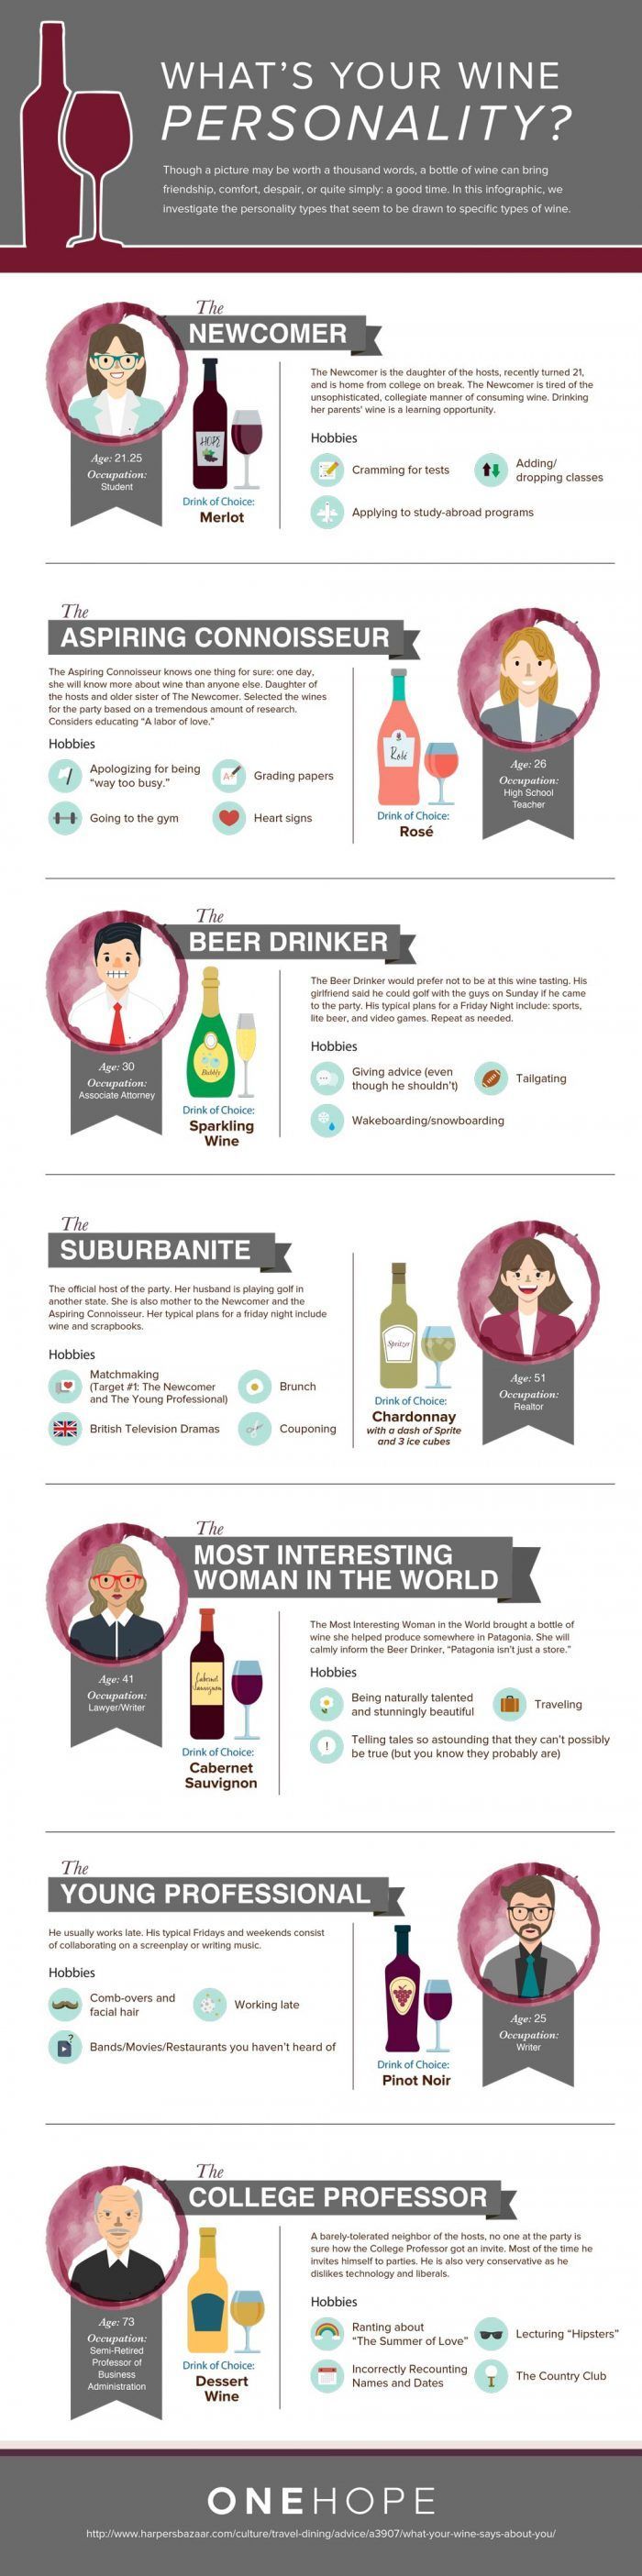 Infographic-Whats-Your-Wine-Personality Infographic : What's Your Wine Personality